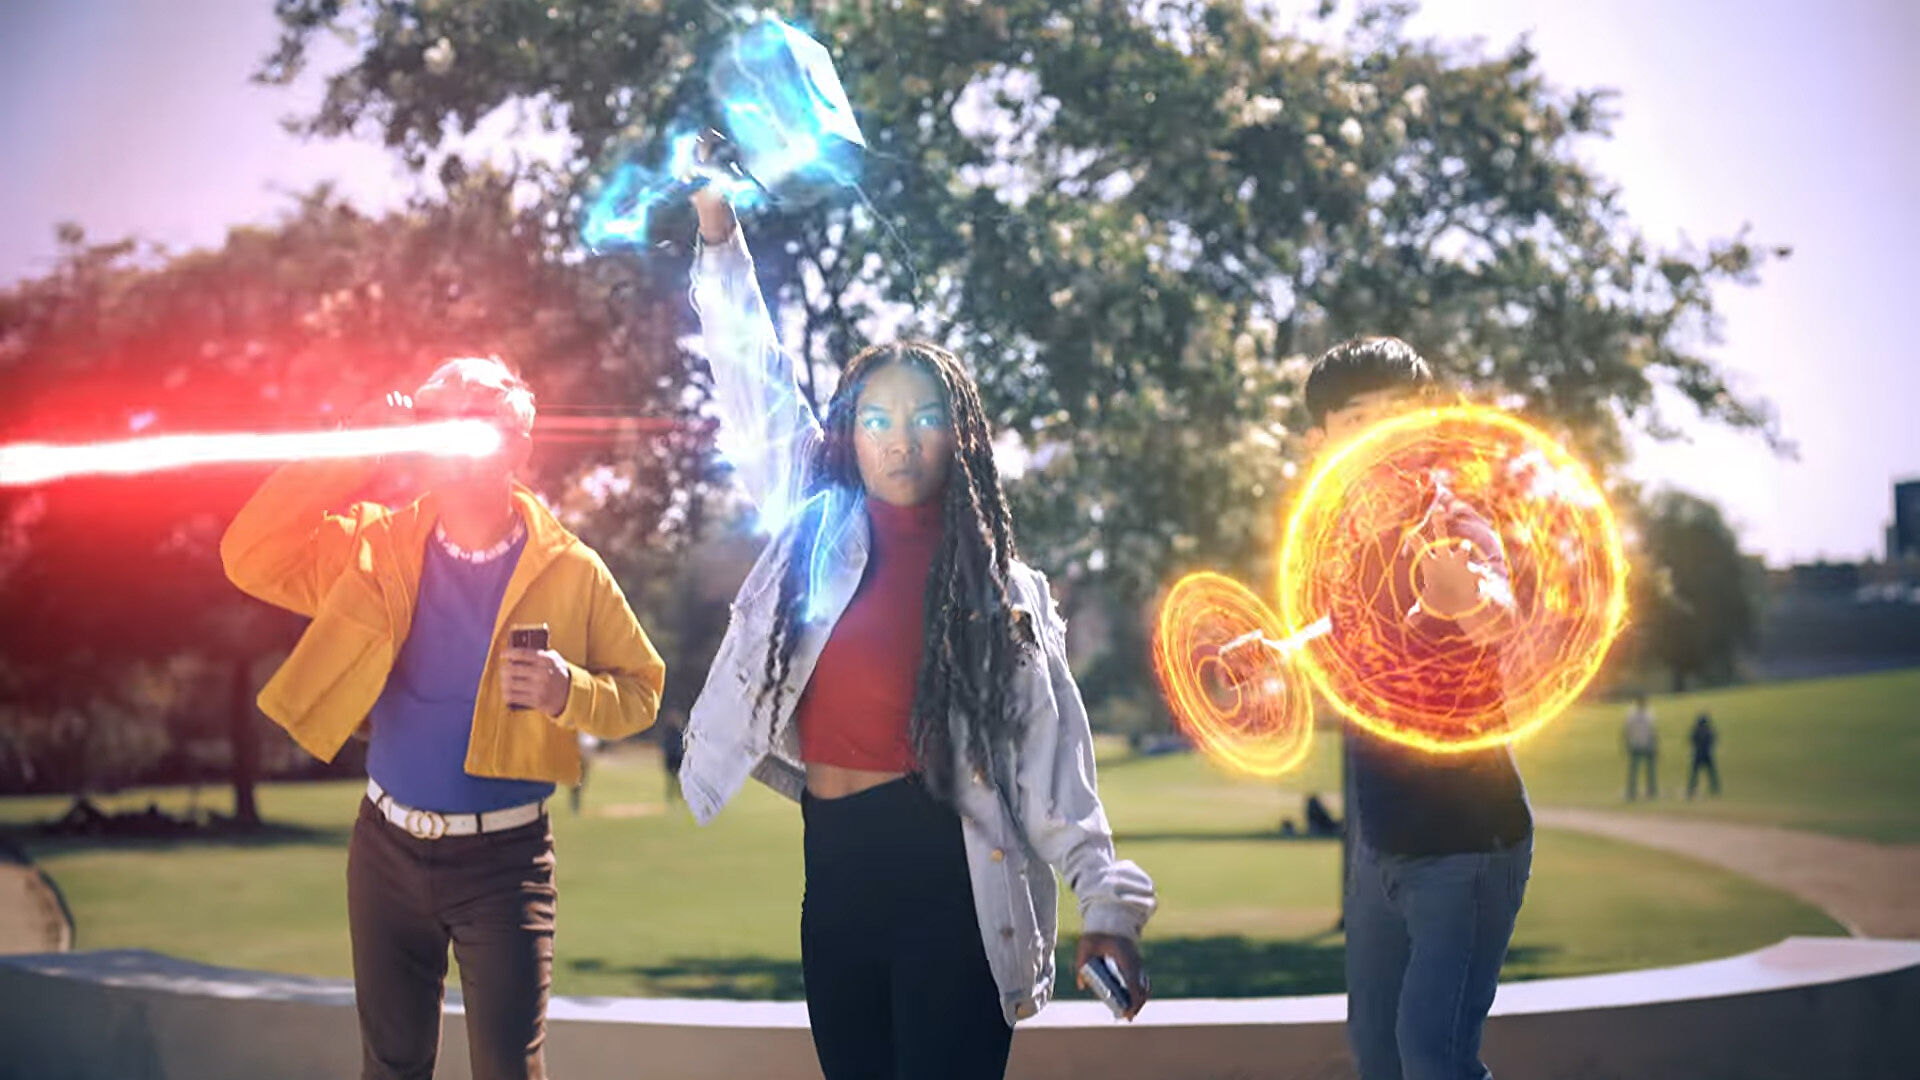 Marvel World of Heroes is Niantic’s next attempt at an AR hit